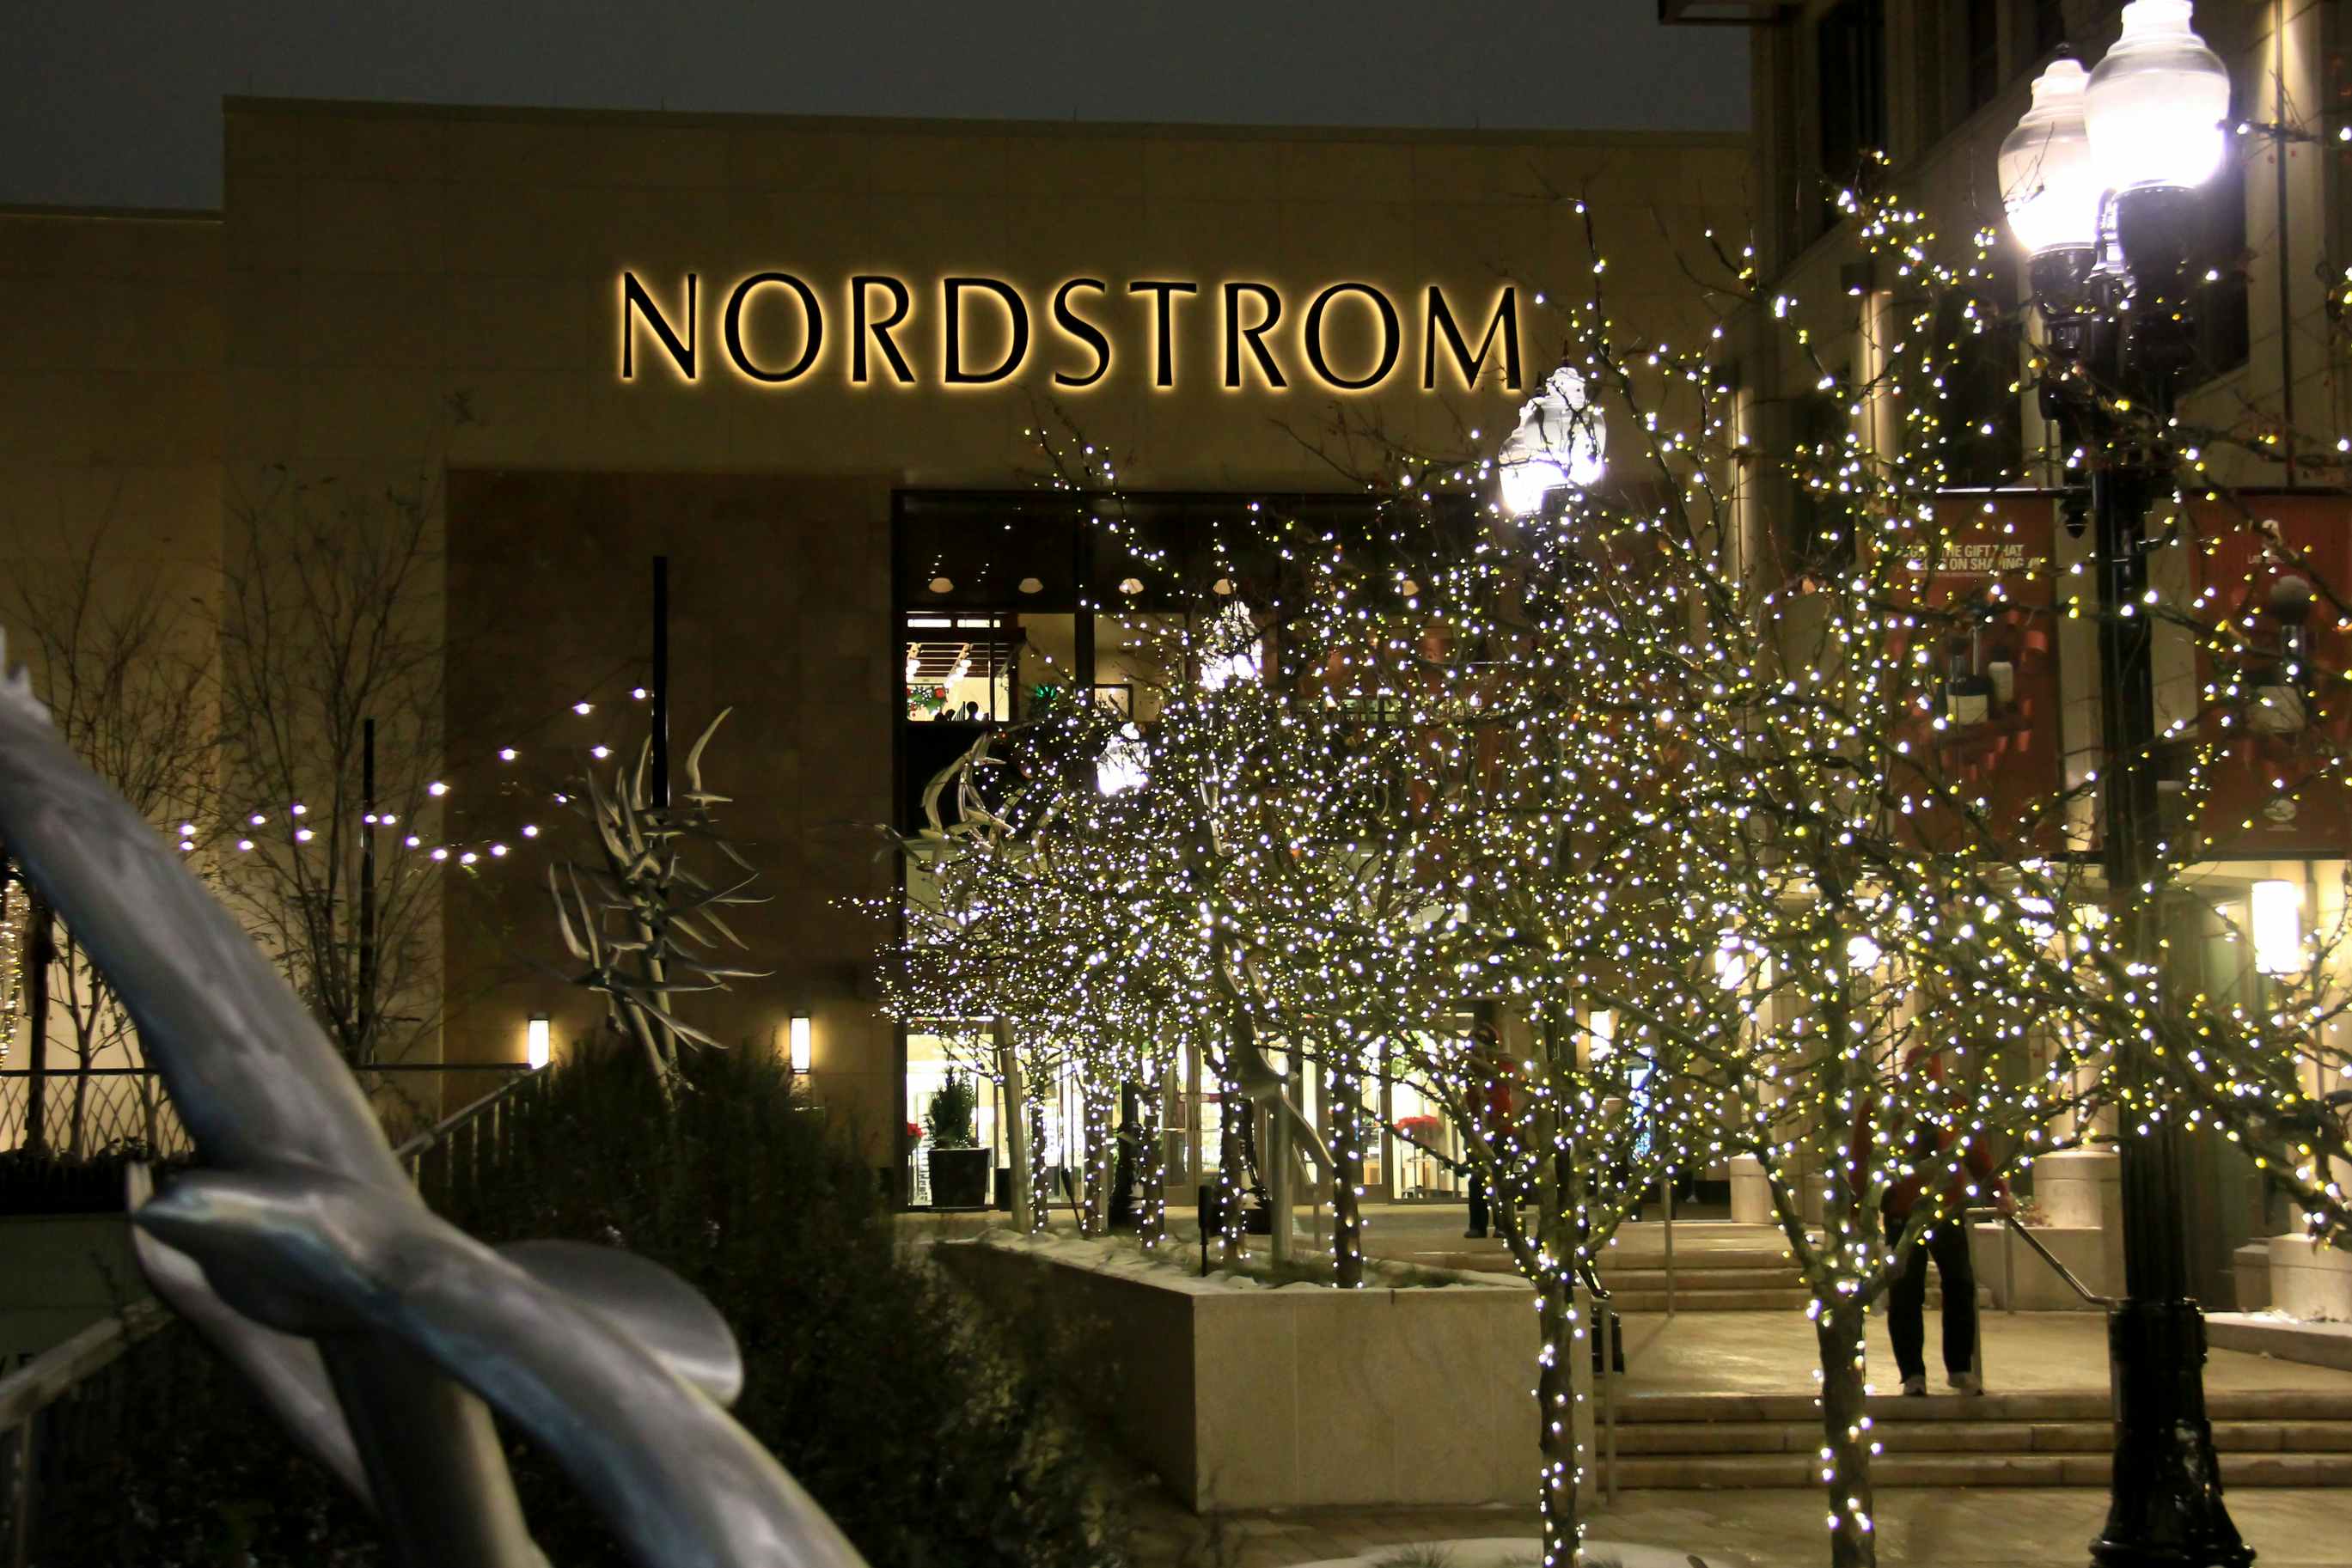 Trees decorated for Christmas outside of a Nordstrom department store